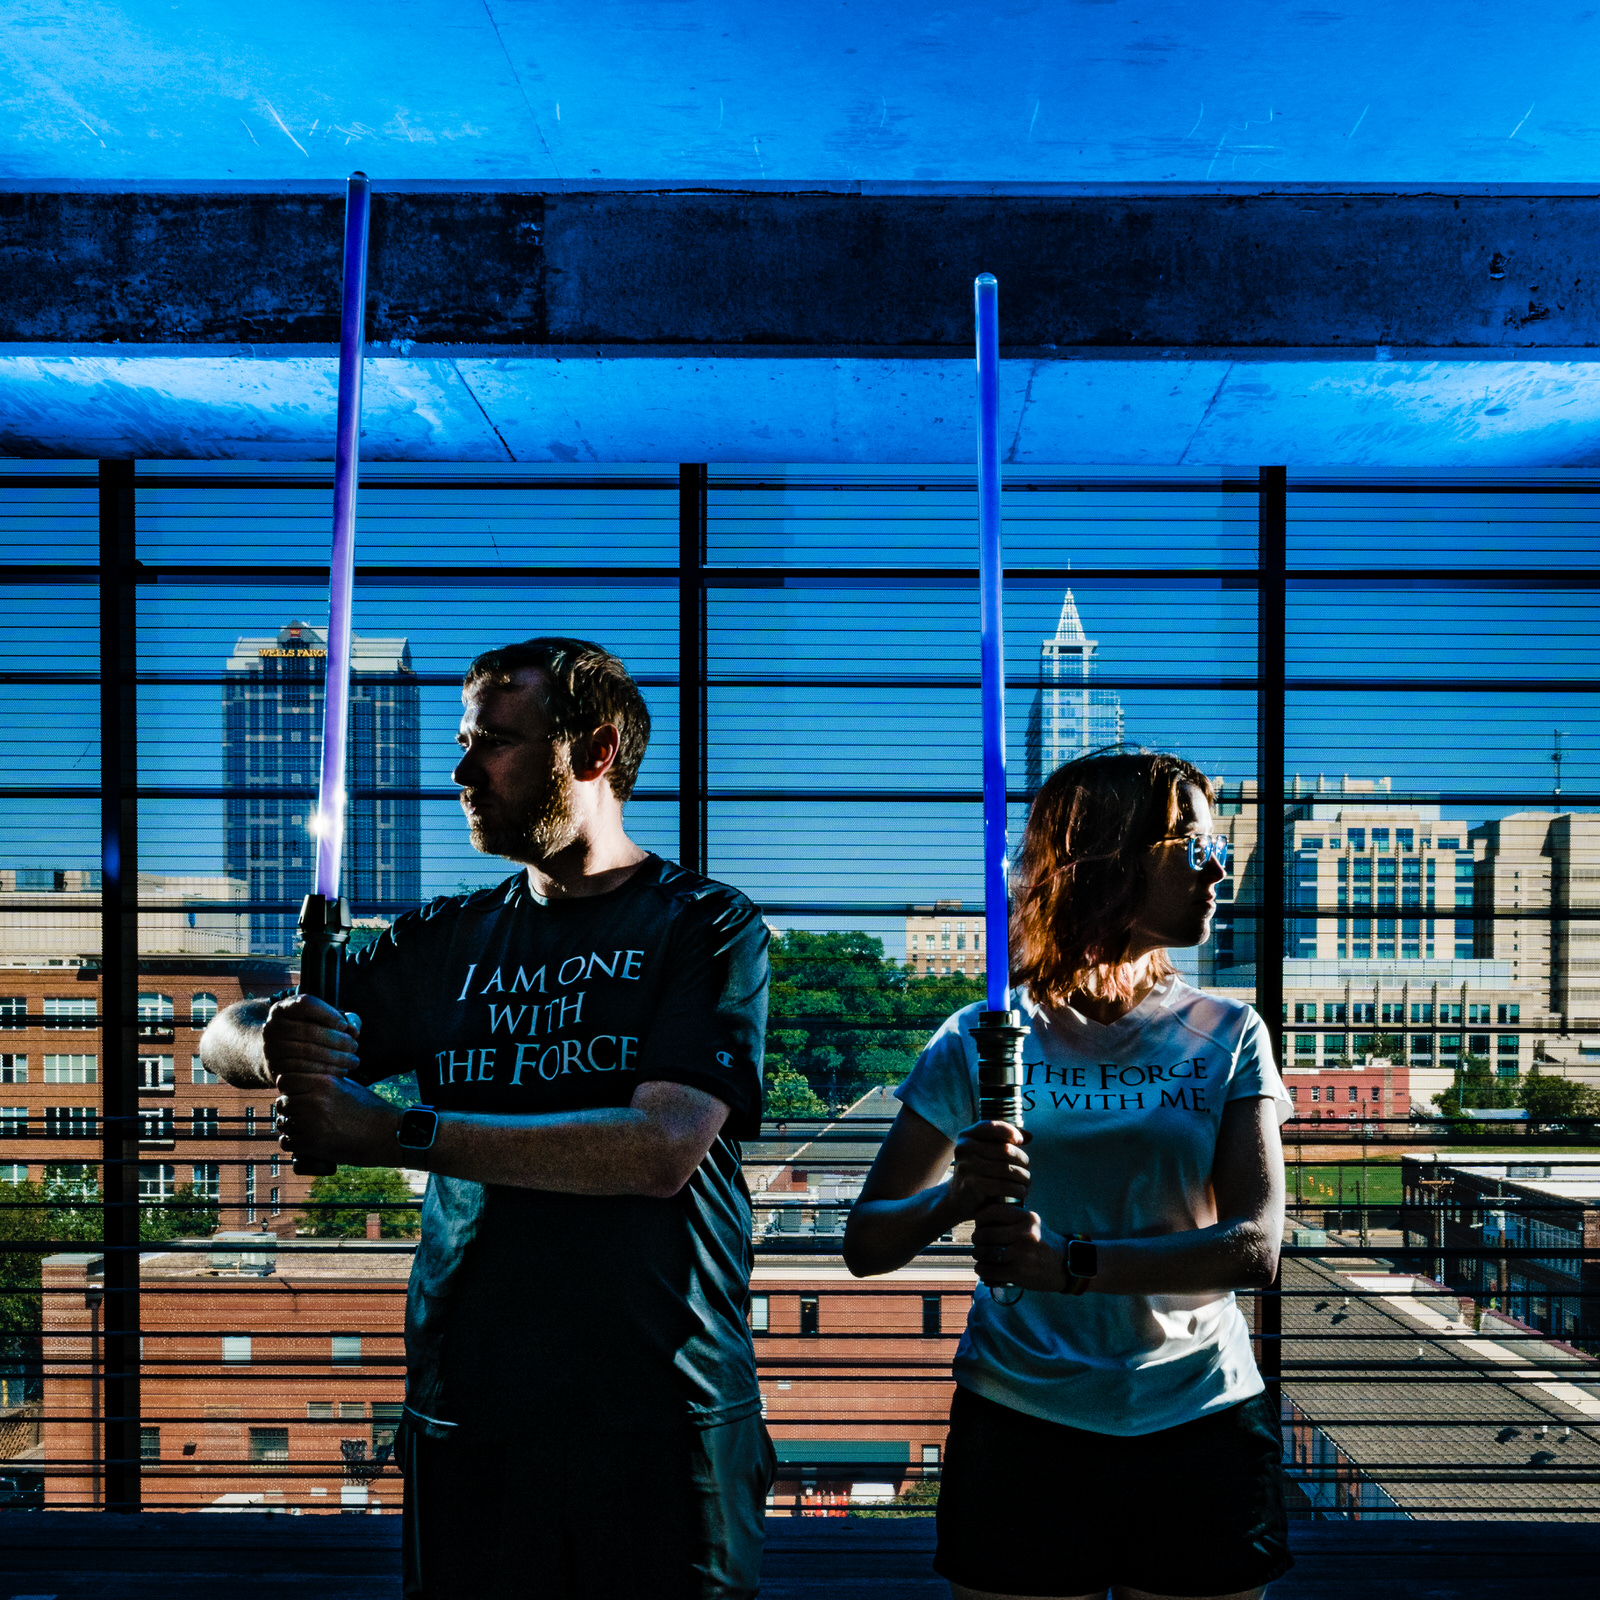 Nerdy wedding photographers pose with lightsabers and the Raleigh skyline